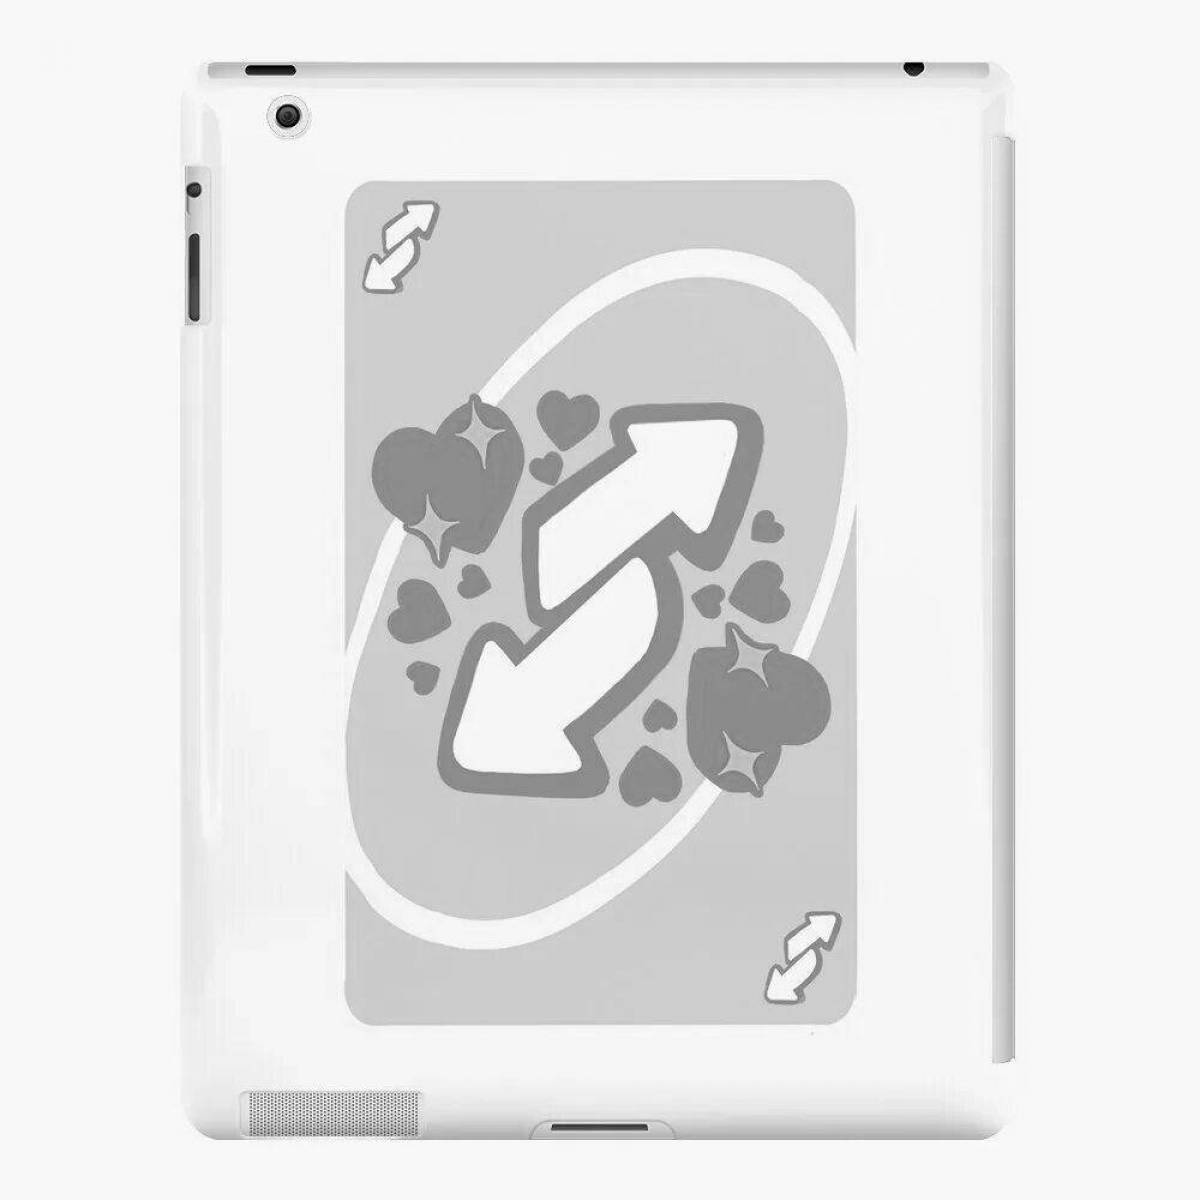 Amazing uno card with hearts